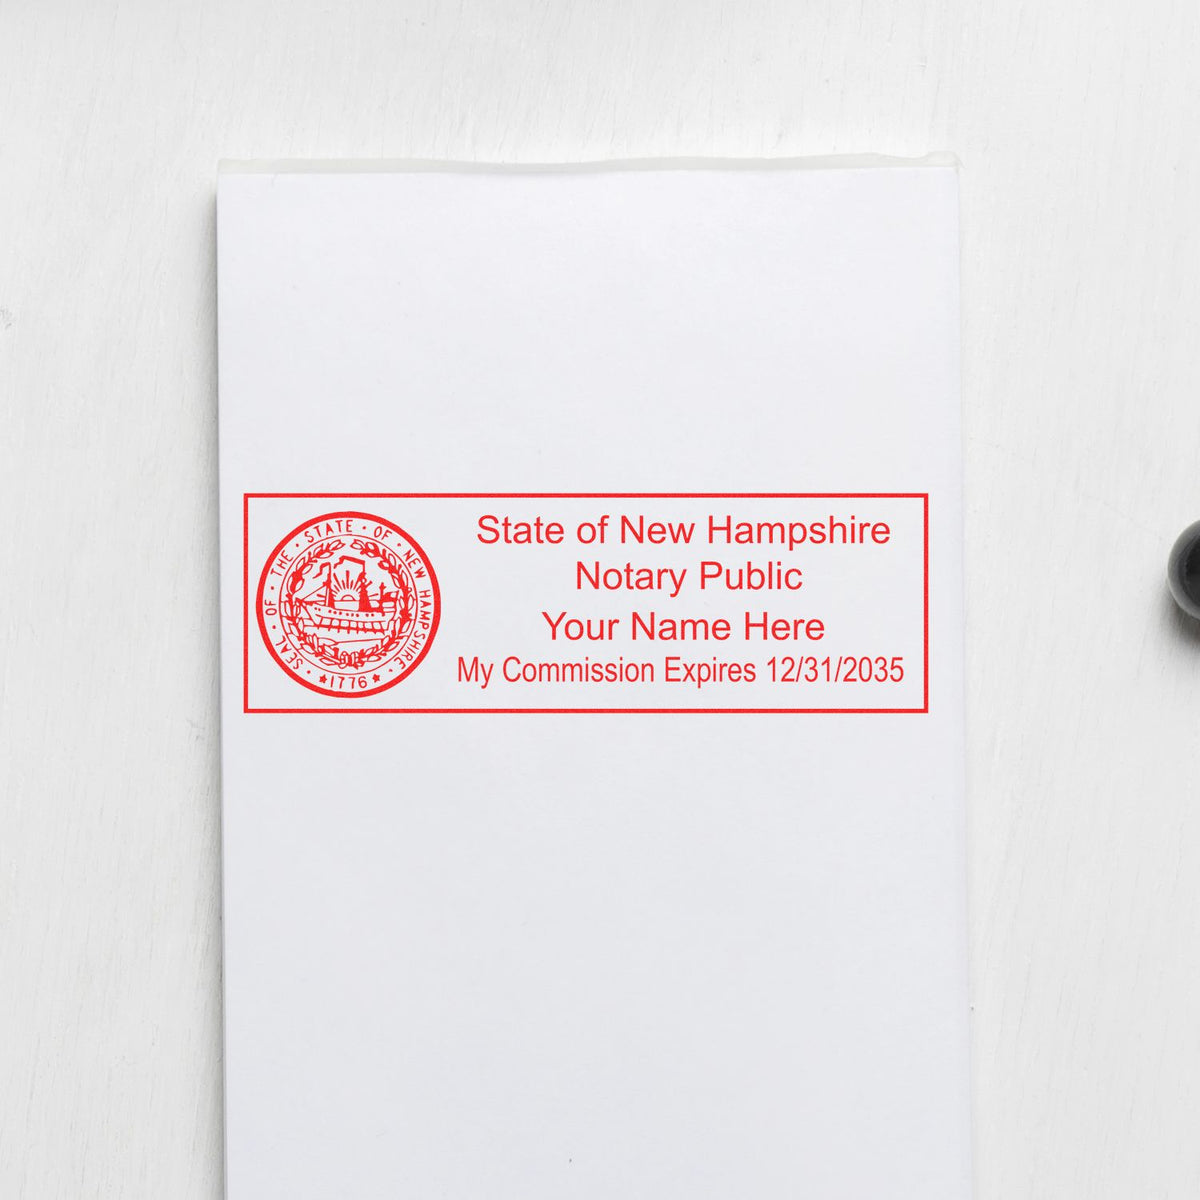 A stamped impression of the Wooden Handle New Hampshire State Seal Notary Public Stamp in this stylish lifestyle photo, setting the tone for a unique and personalized product.